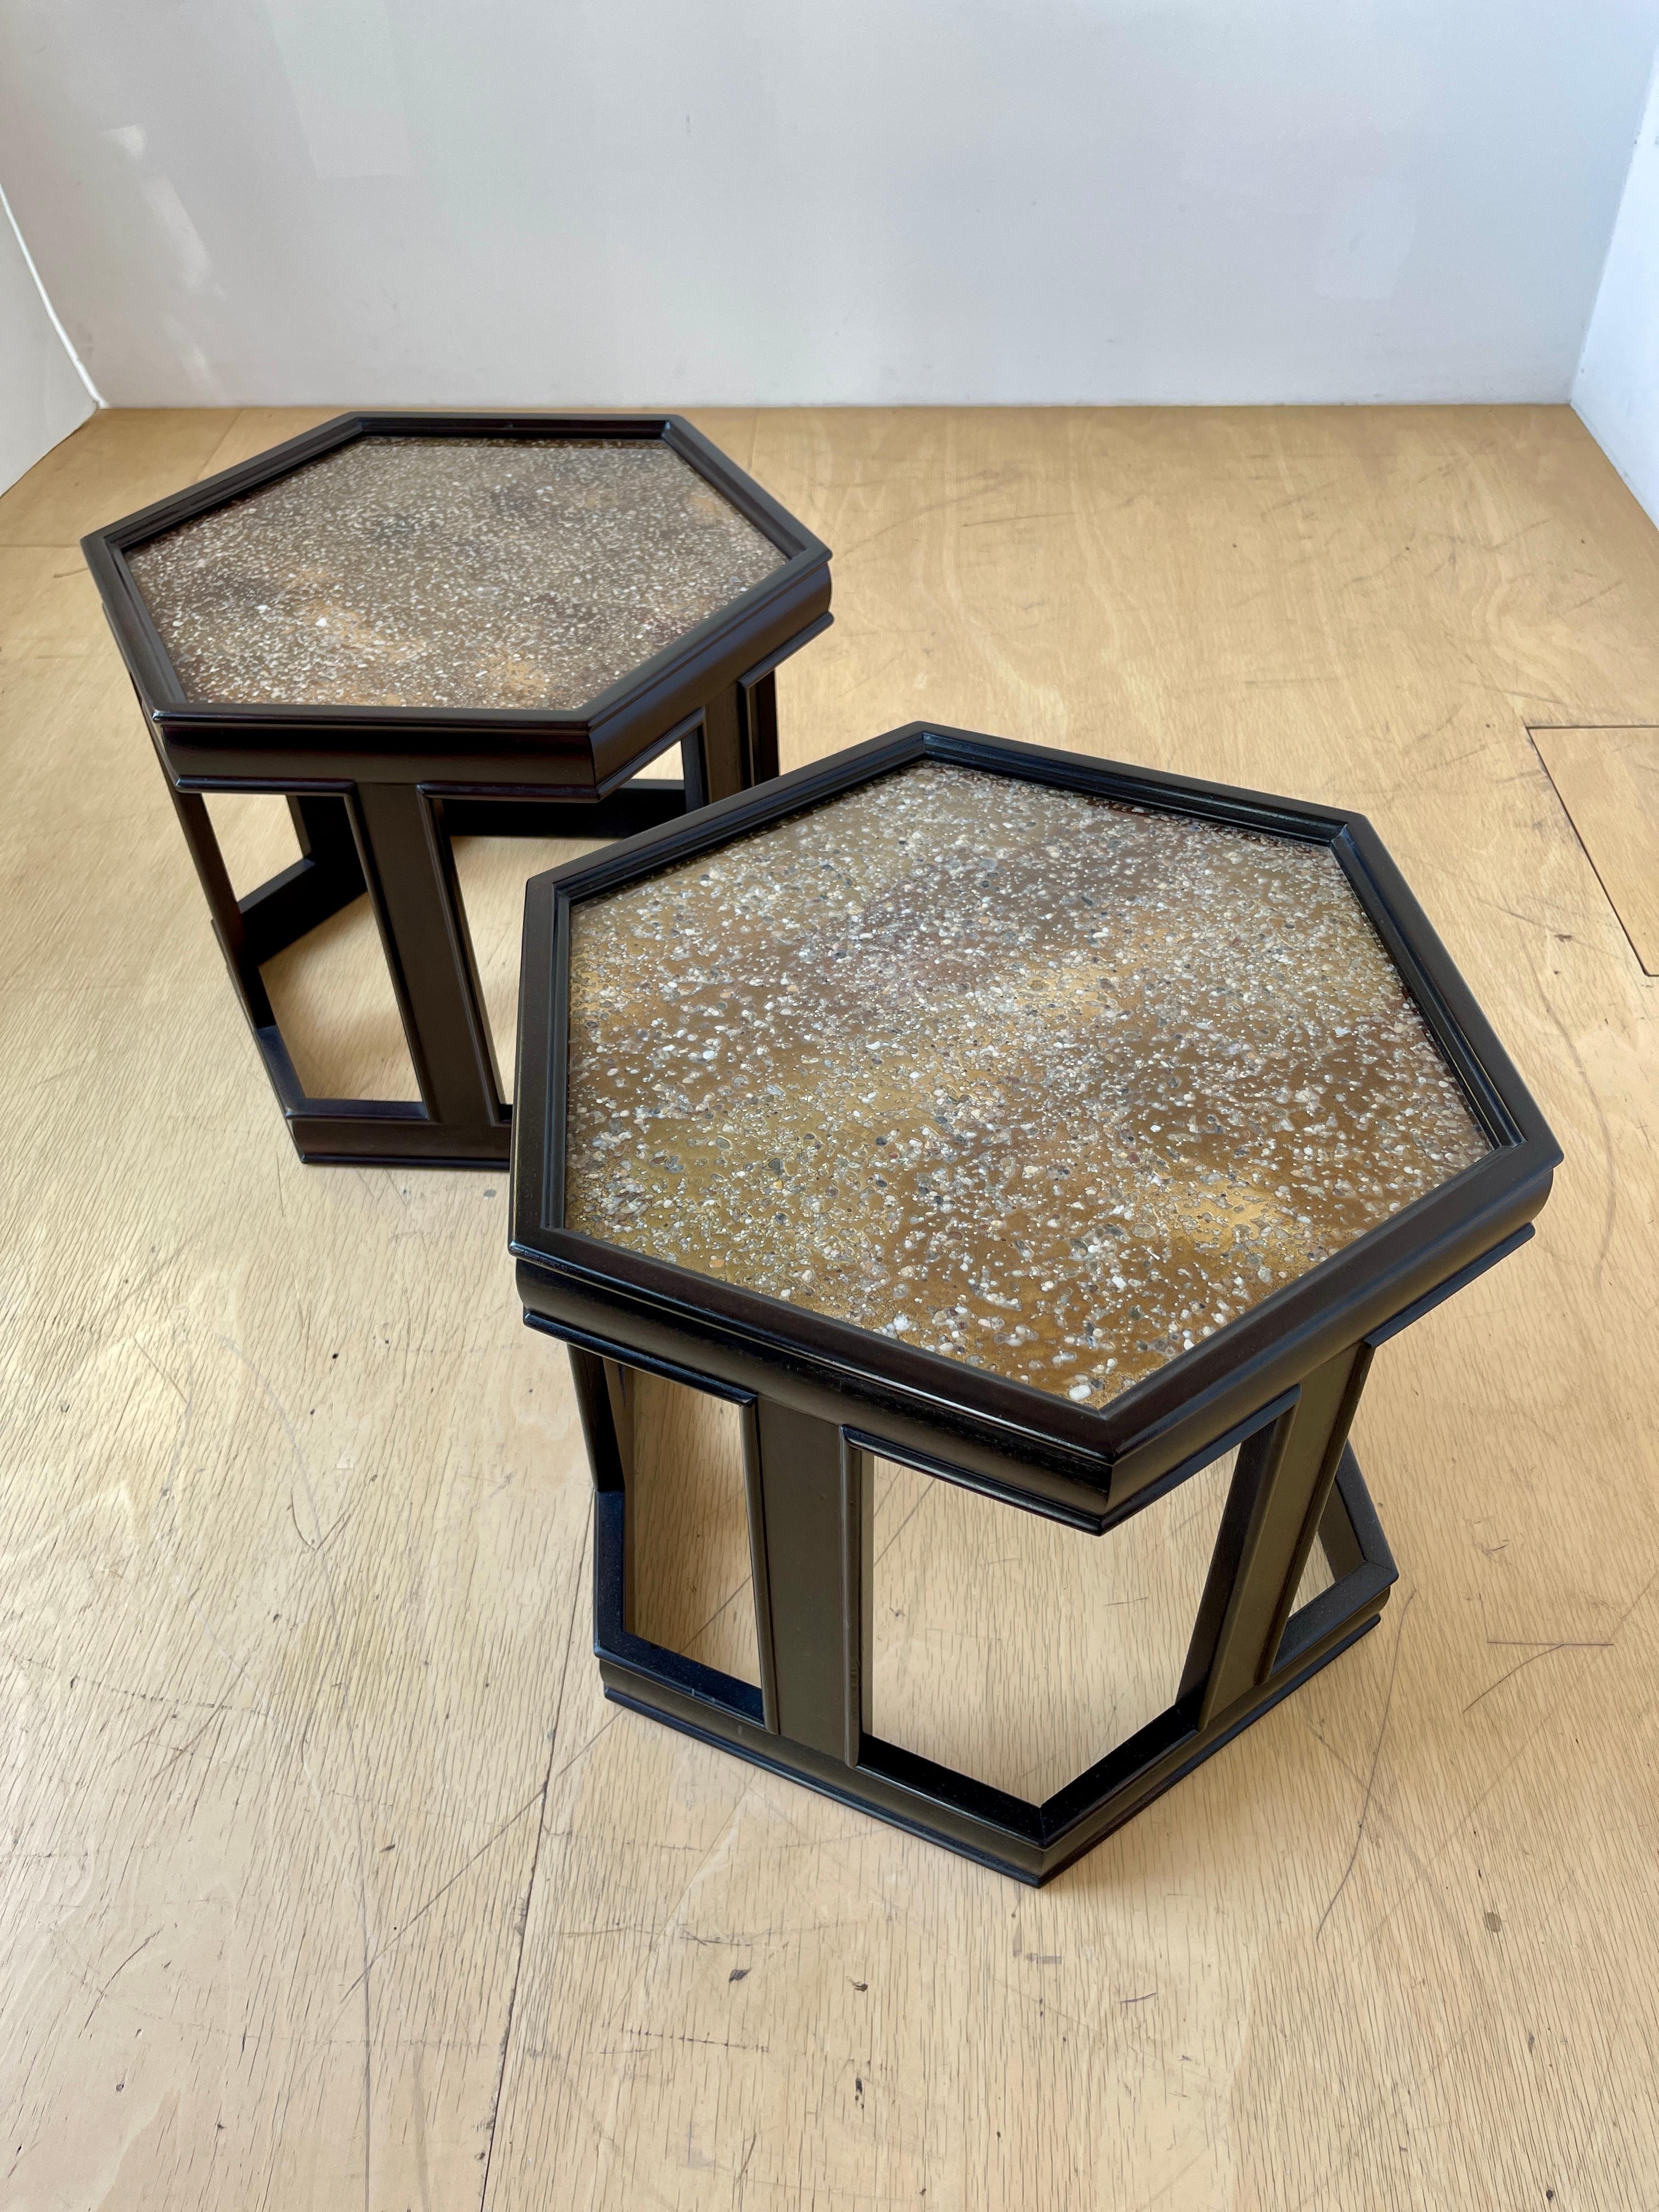  Sold as a set. Priced $900 each. Only two are available.

Octagonal occasional tables by John Keal for Brown Saltman. Lacquered wood (dark espresso) with smooth glass tops. Reverse painting on glass creates an organic, golden, pebbled effect. (See